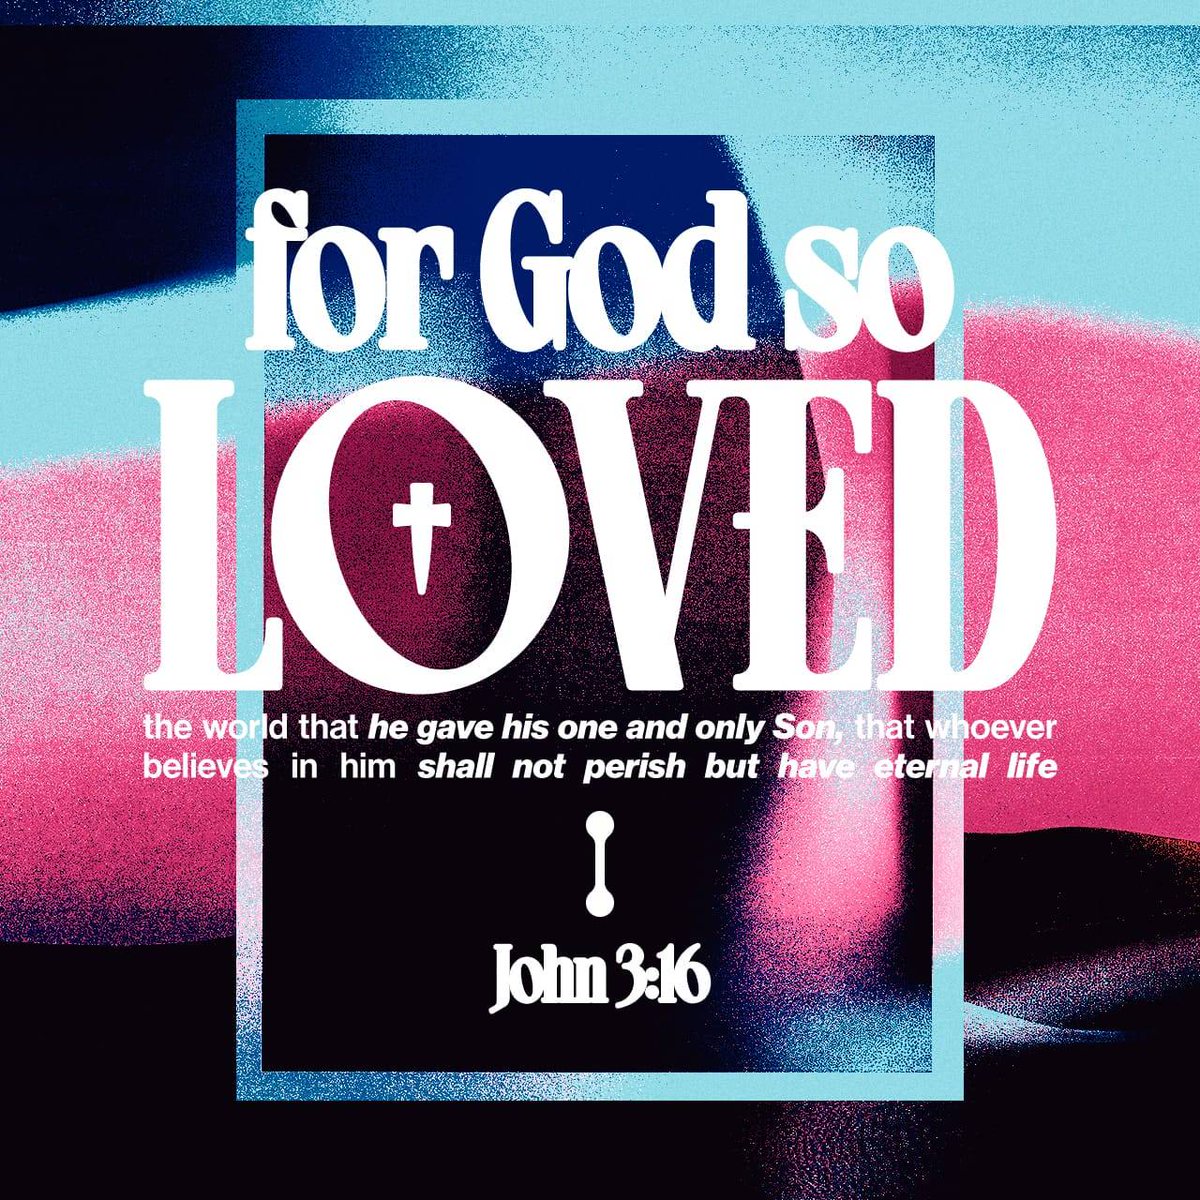 'For God so loved the world that he gave his one and only Son, that whoever believes in him shall not perish but have eternal life.' -John 3:16 NIV
bible.com/verse-of-the-d…
#BeBornAgain